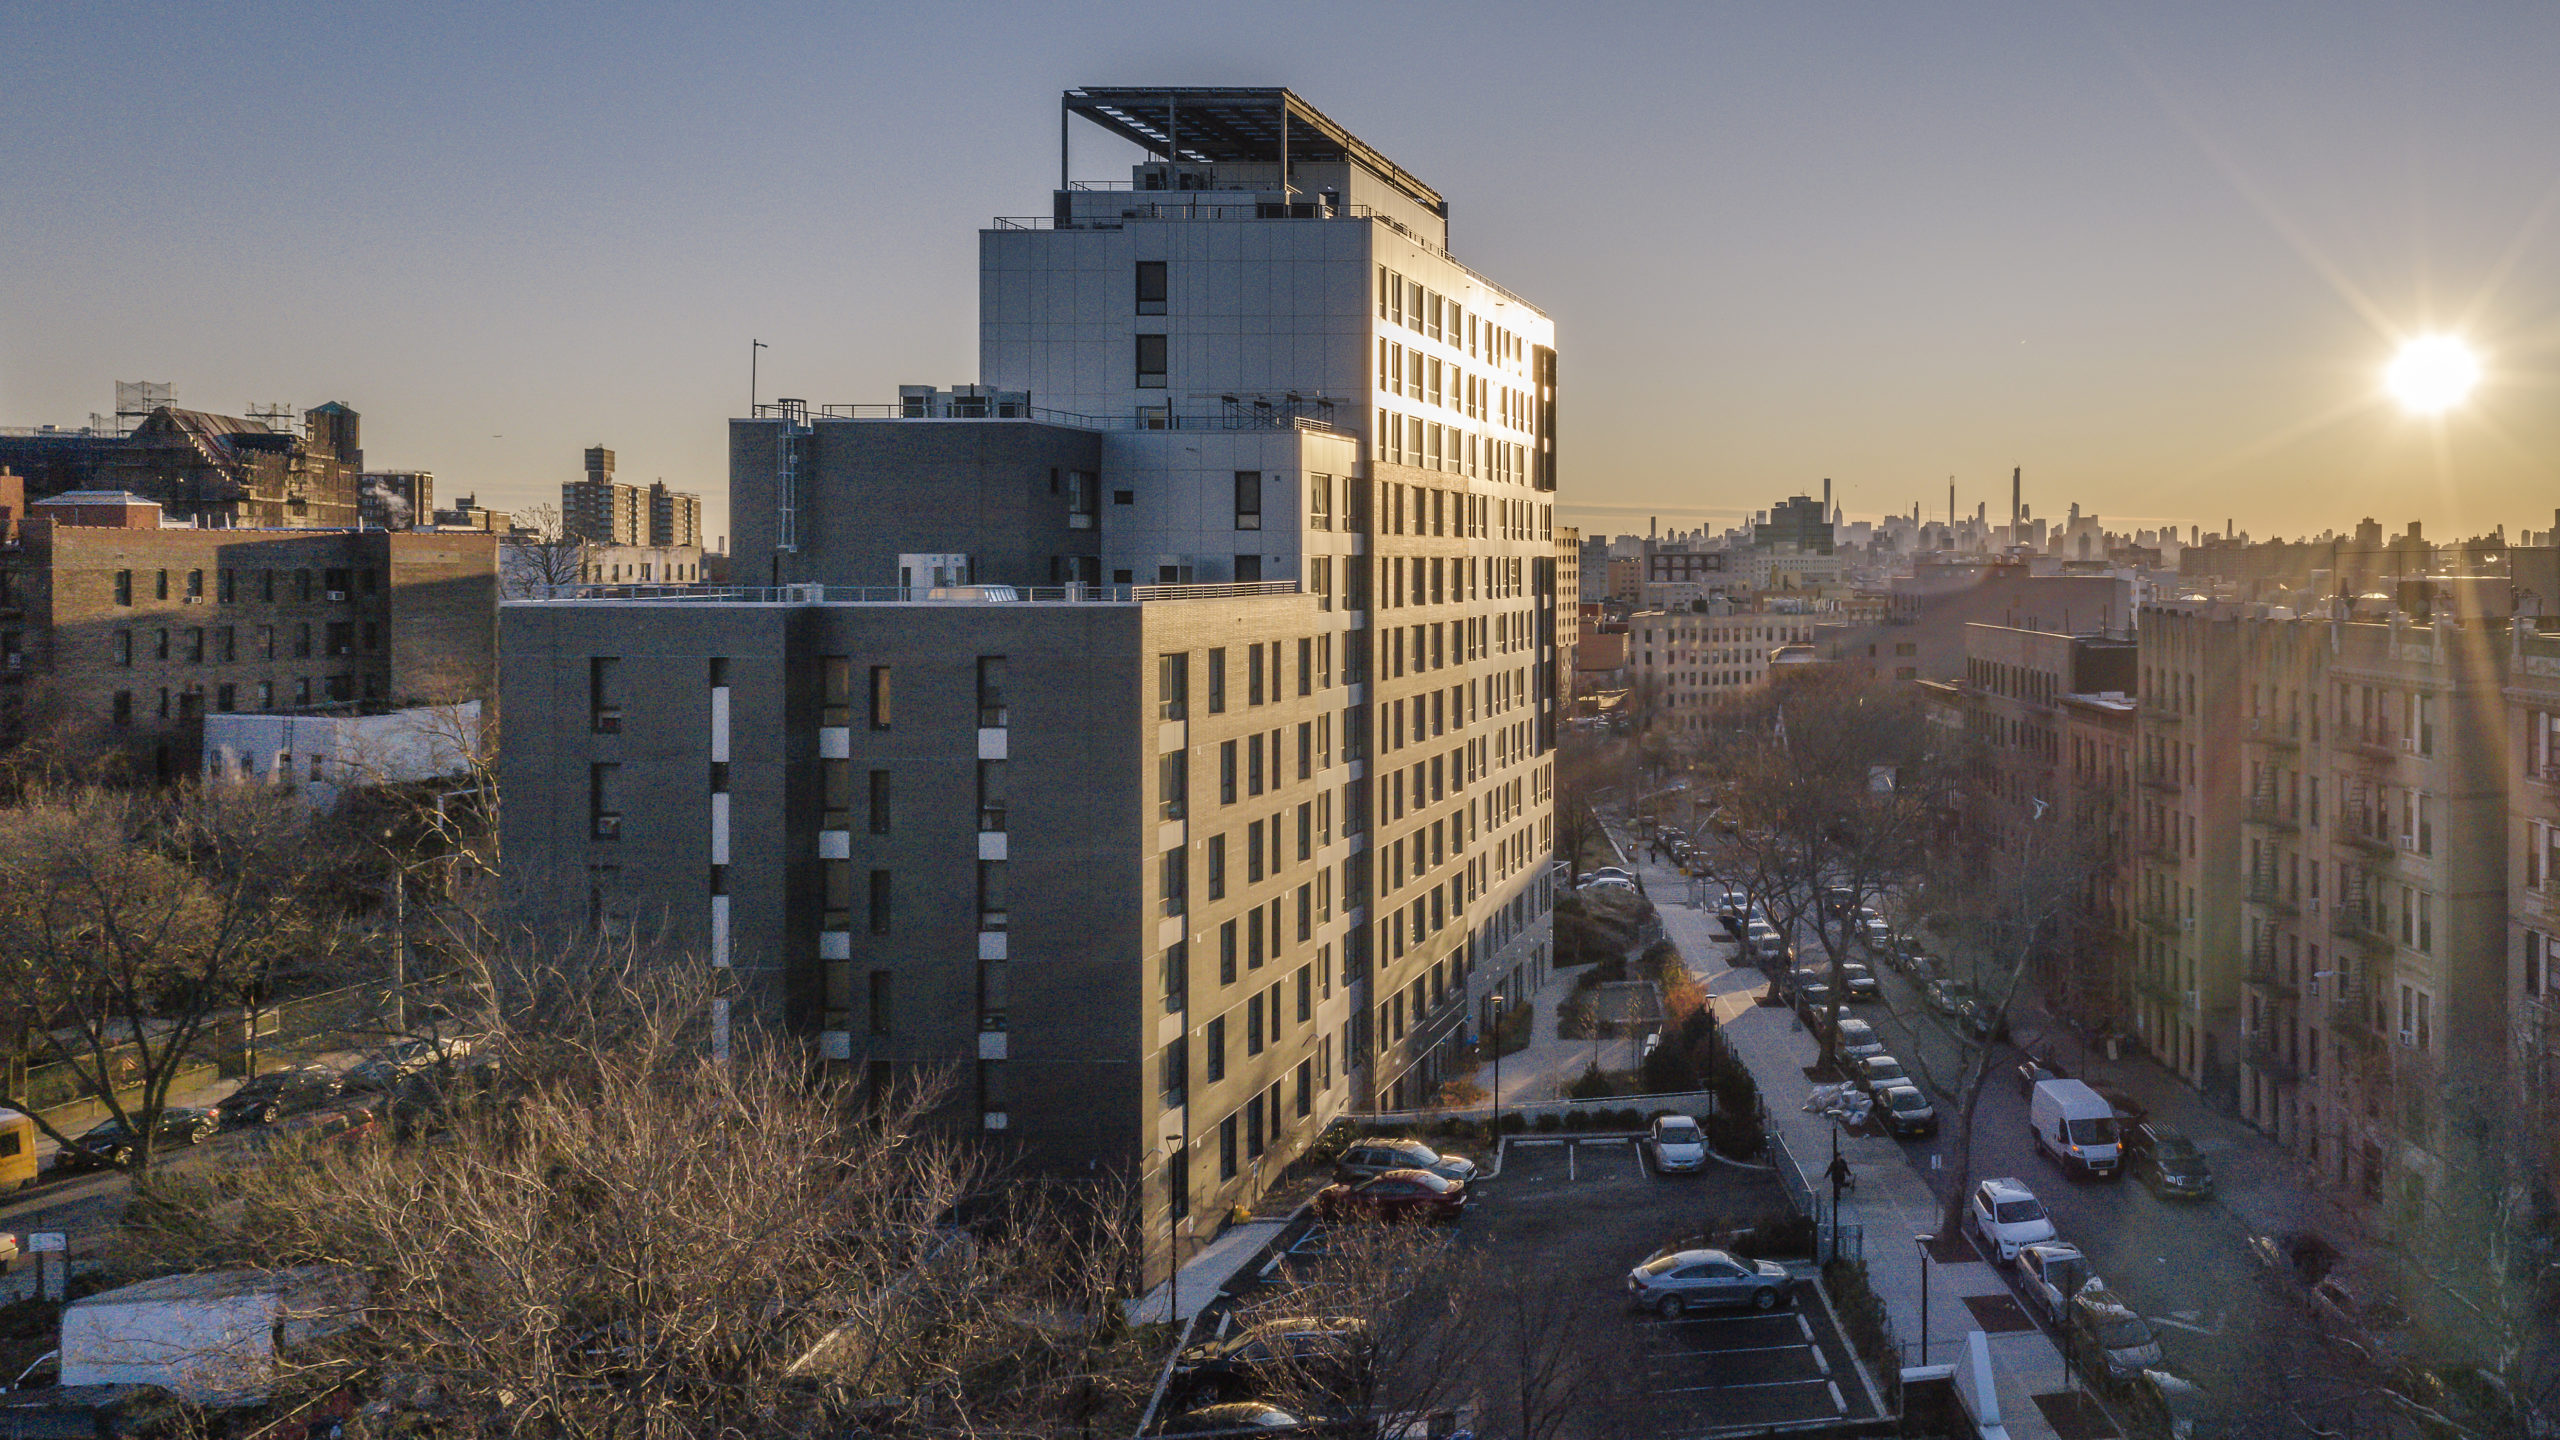 Architecture Merit Award: St. Augustine Terrace by Magnusson Architecture and Planning and Terrain, in the Bronx NY. Photo: Miguel de Guzman.